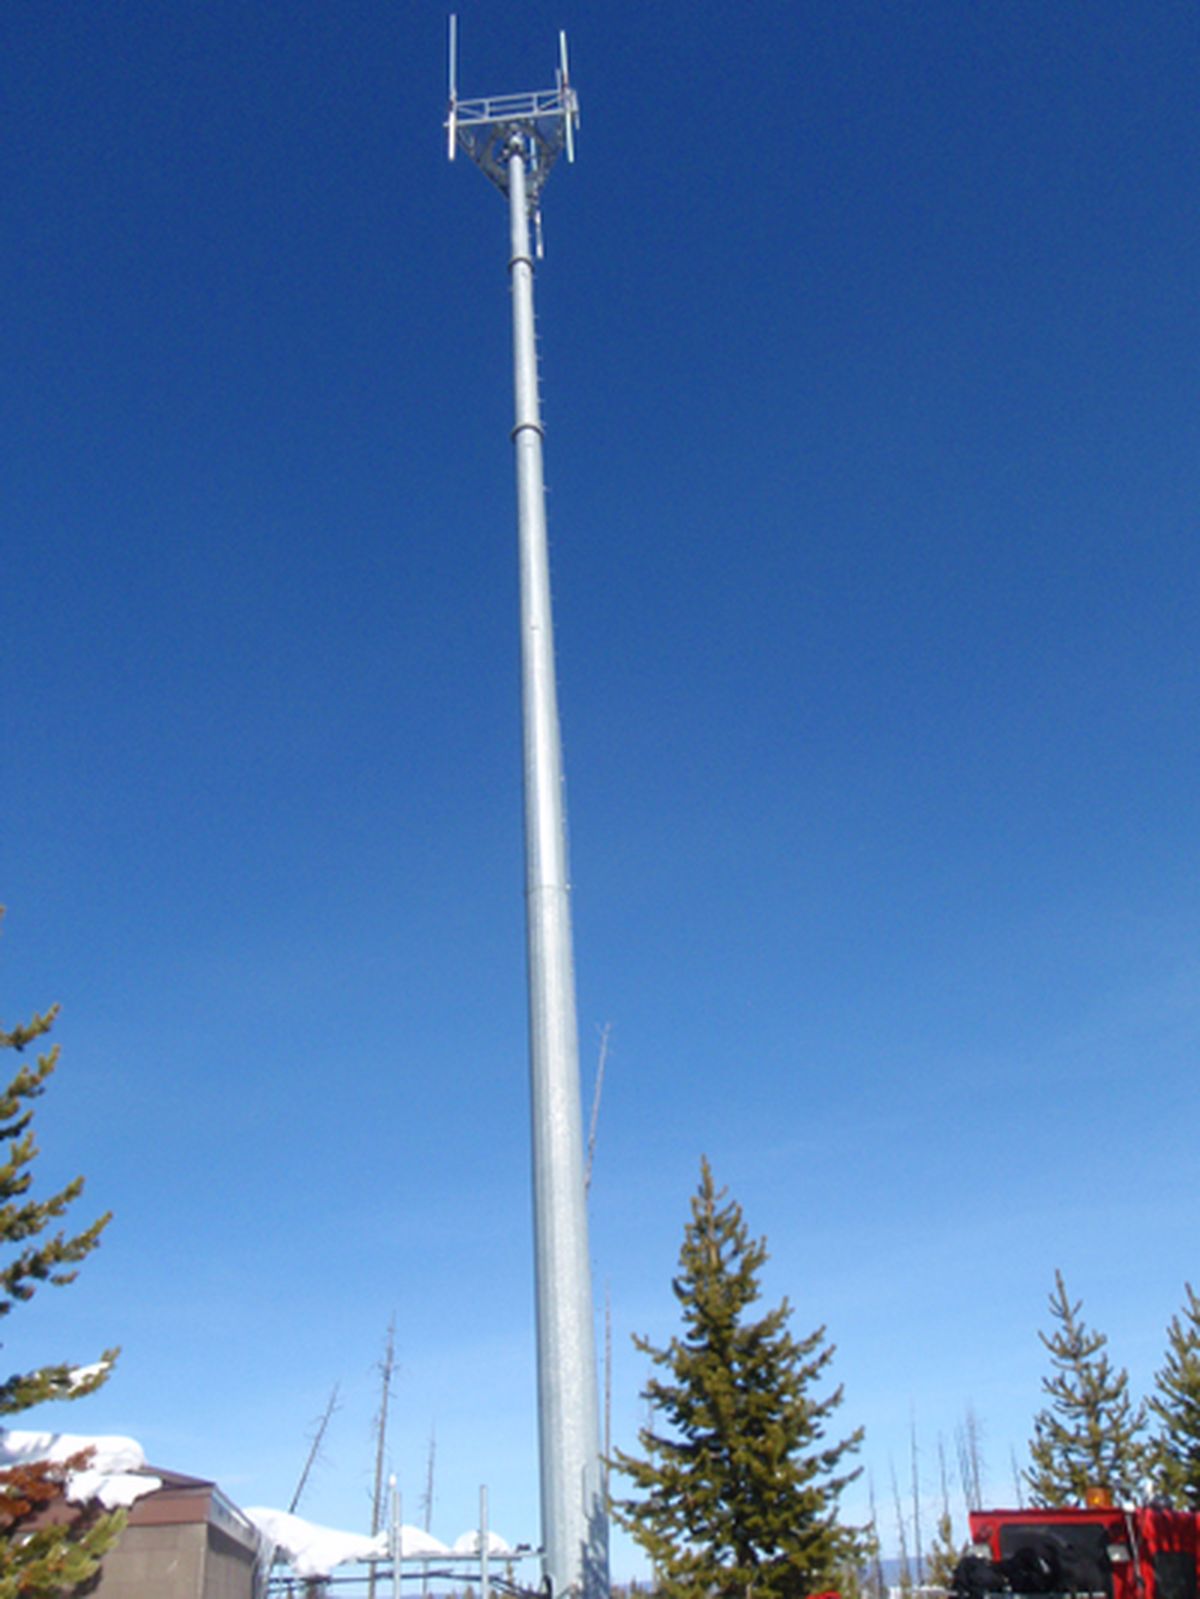 A cell phone tower at Grant Village in Yellowstone National Park. (National Park Service)